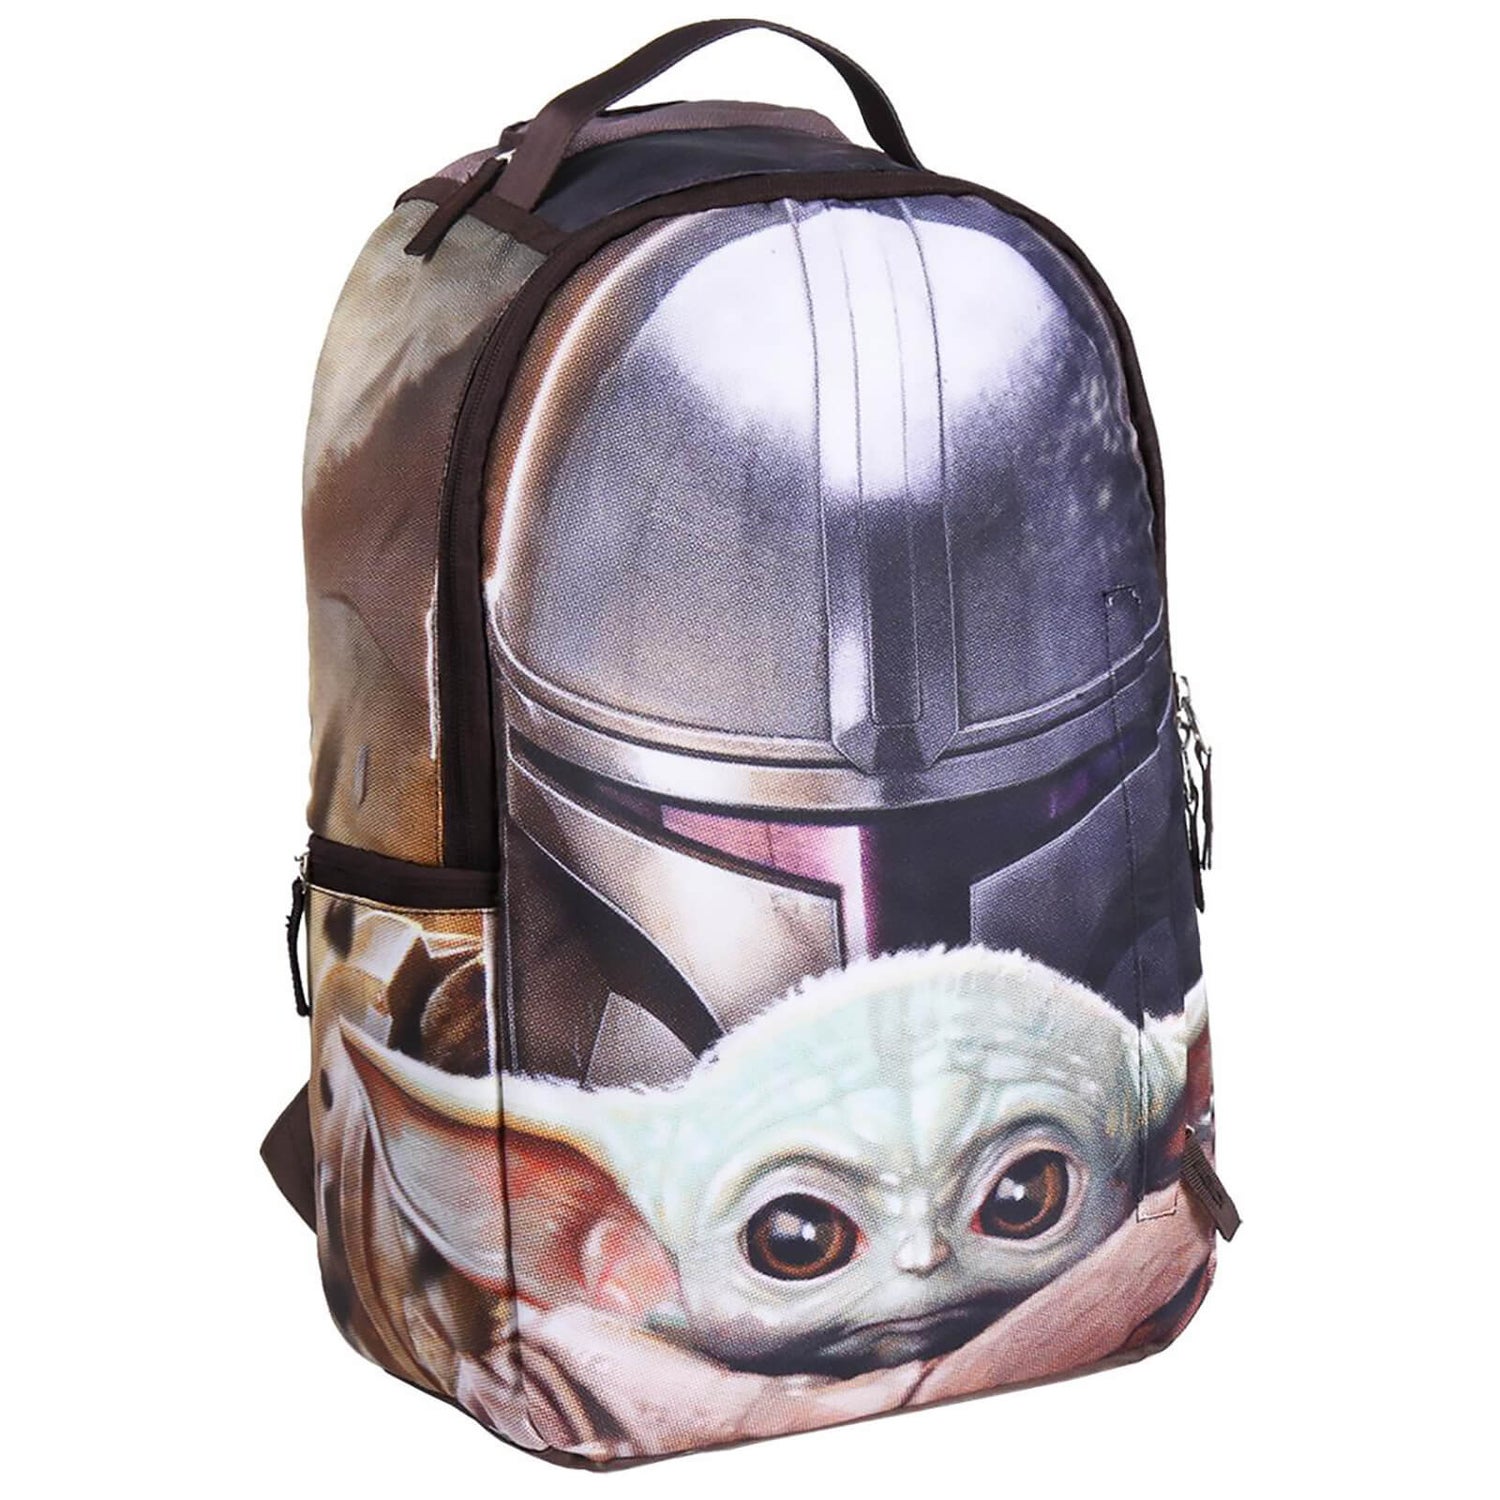 The Mandalorian and The Child Backpack